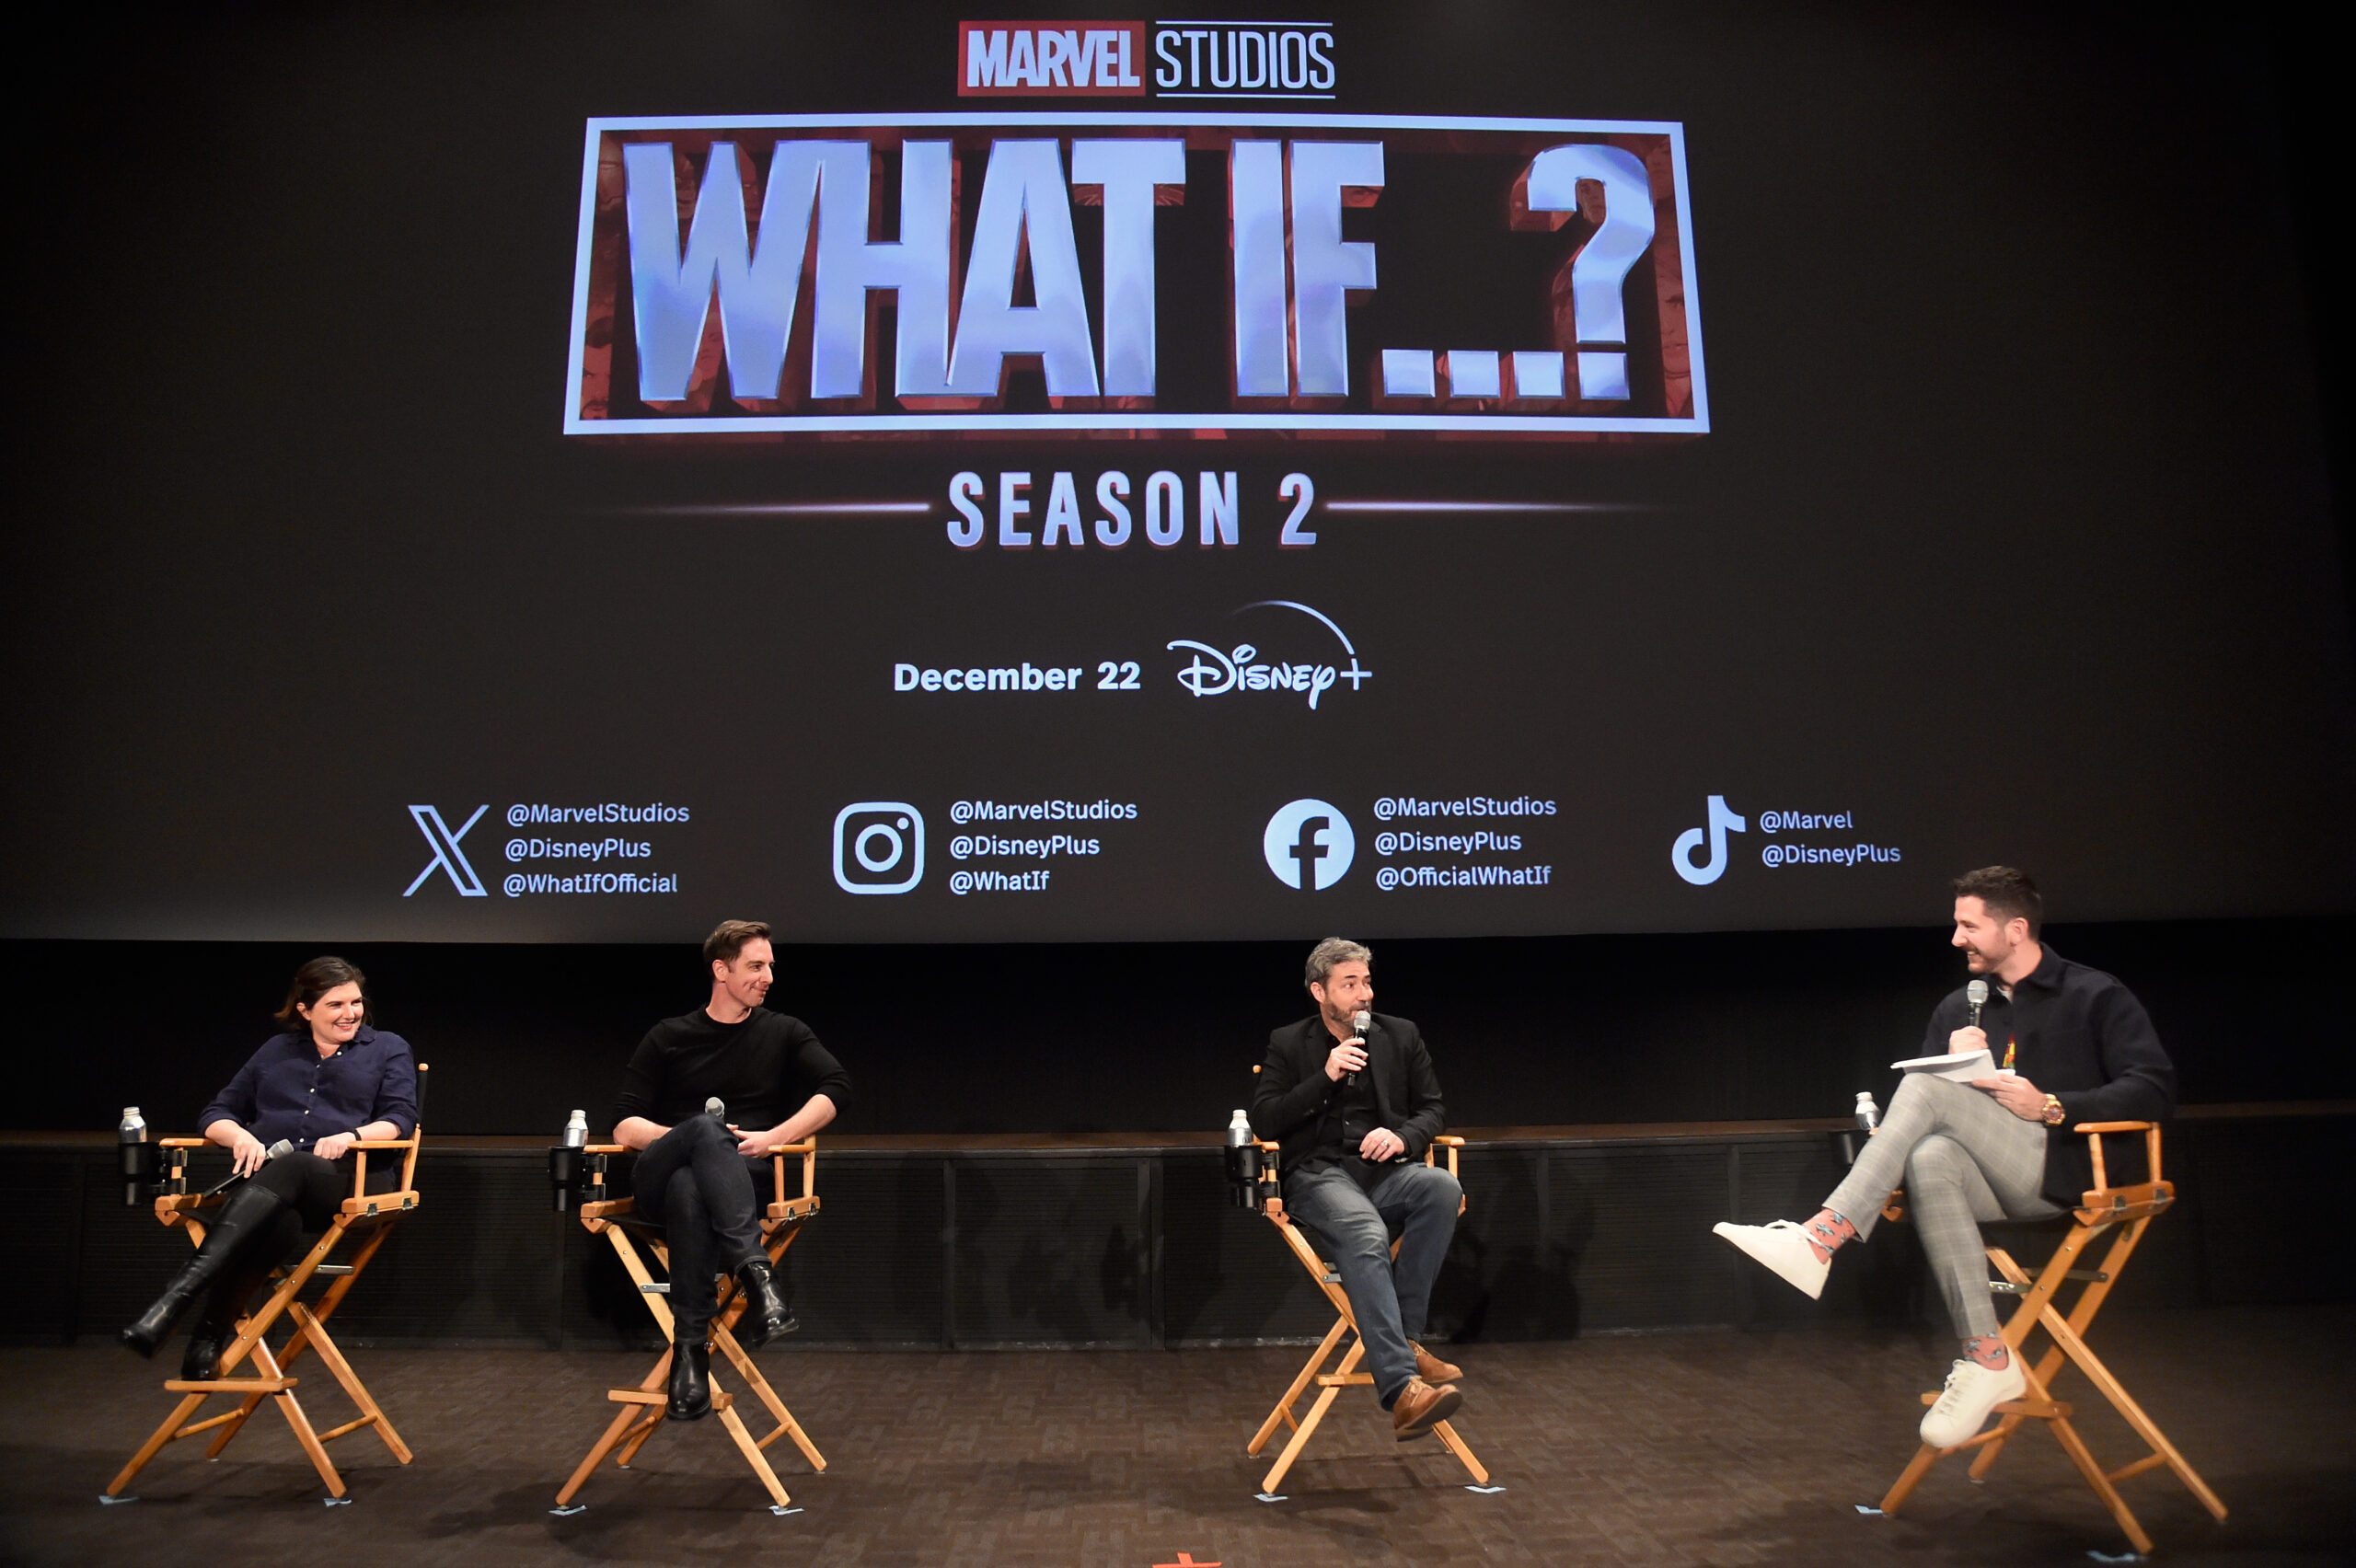 6 Things We Learned About Season 2 of Marvel’s “What If…”?